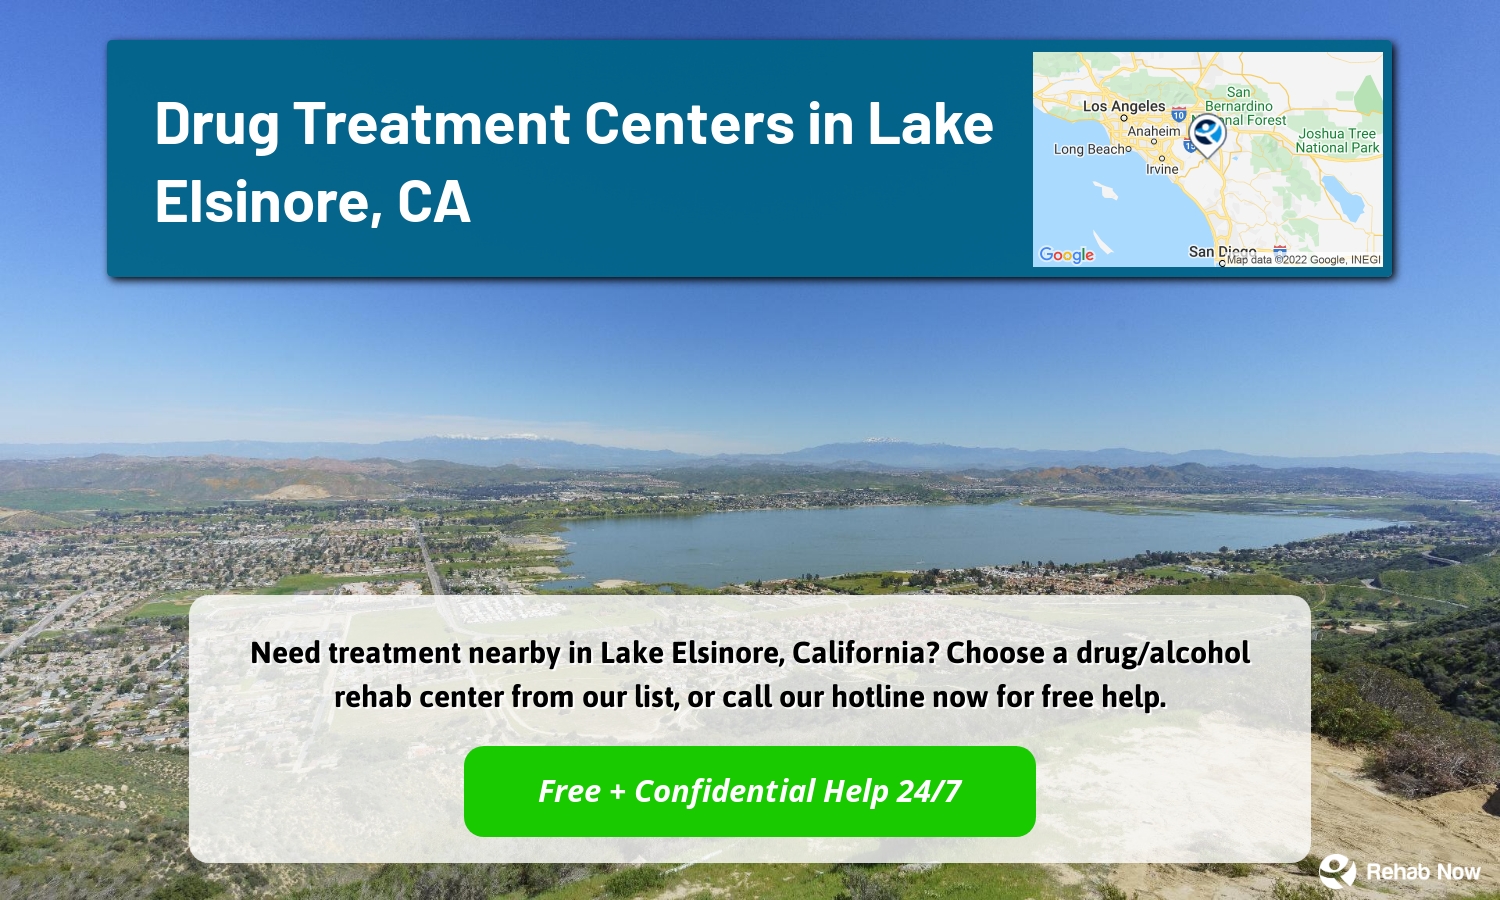 Need treatment nearby in Lake Elsinore, California? Choose a drug/alcohol rehab center from our list, or call our hotline now for free help.